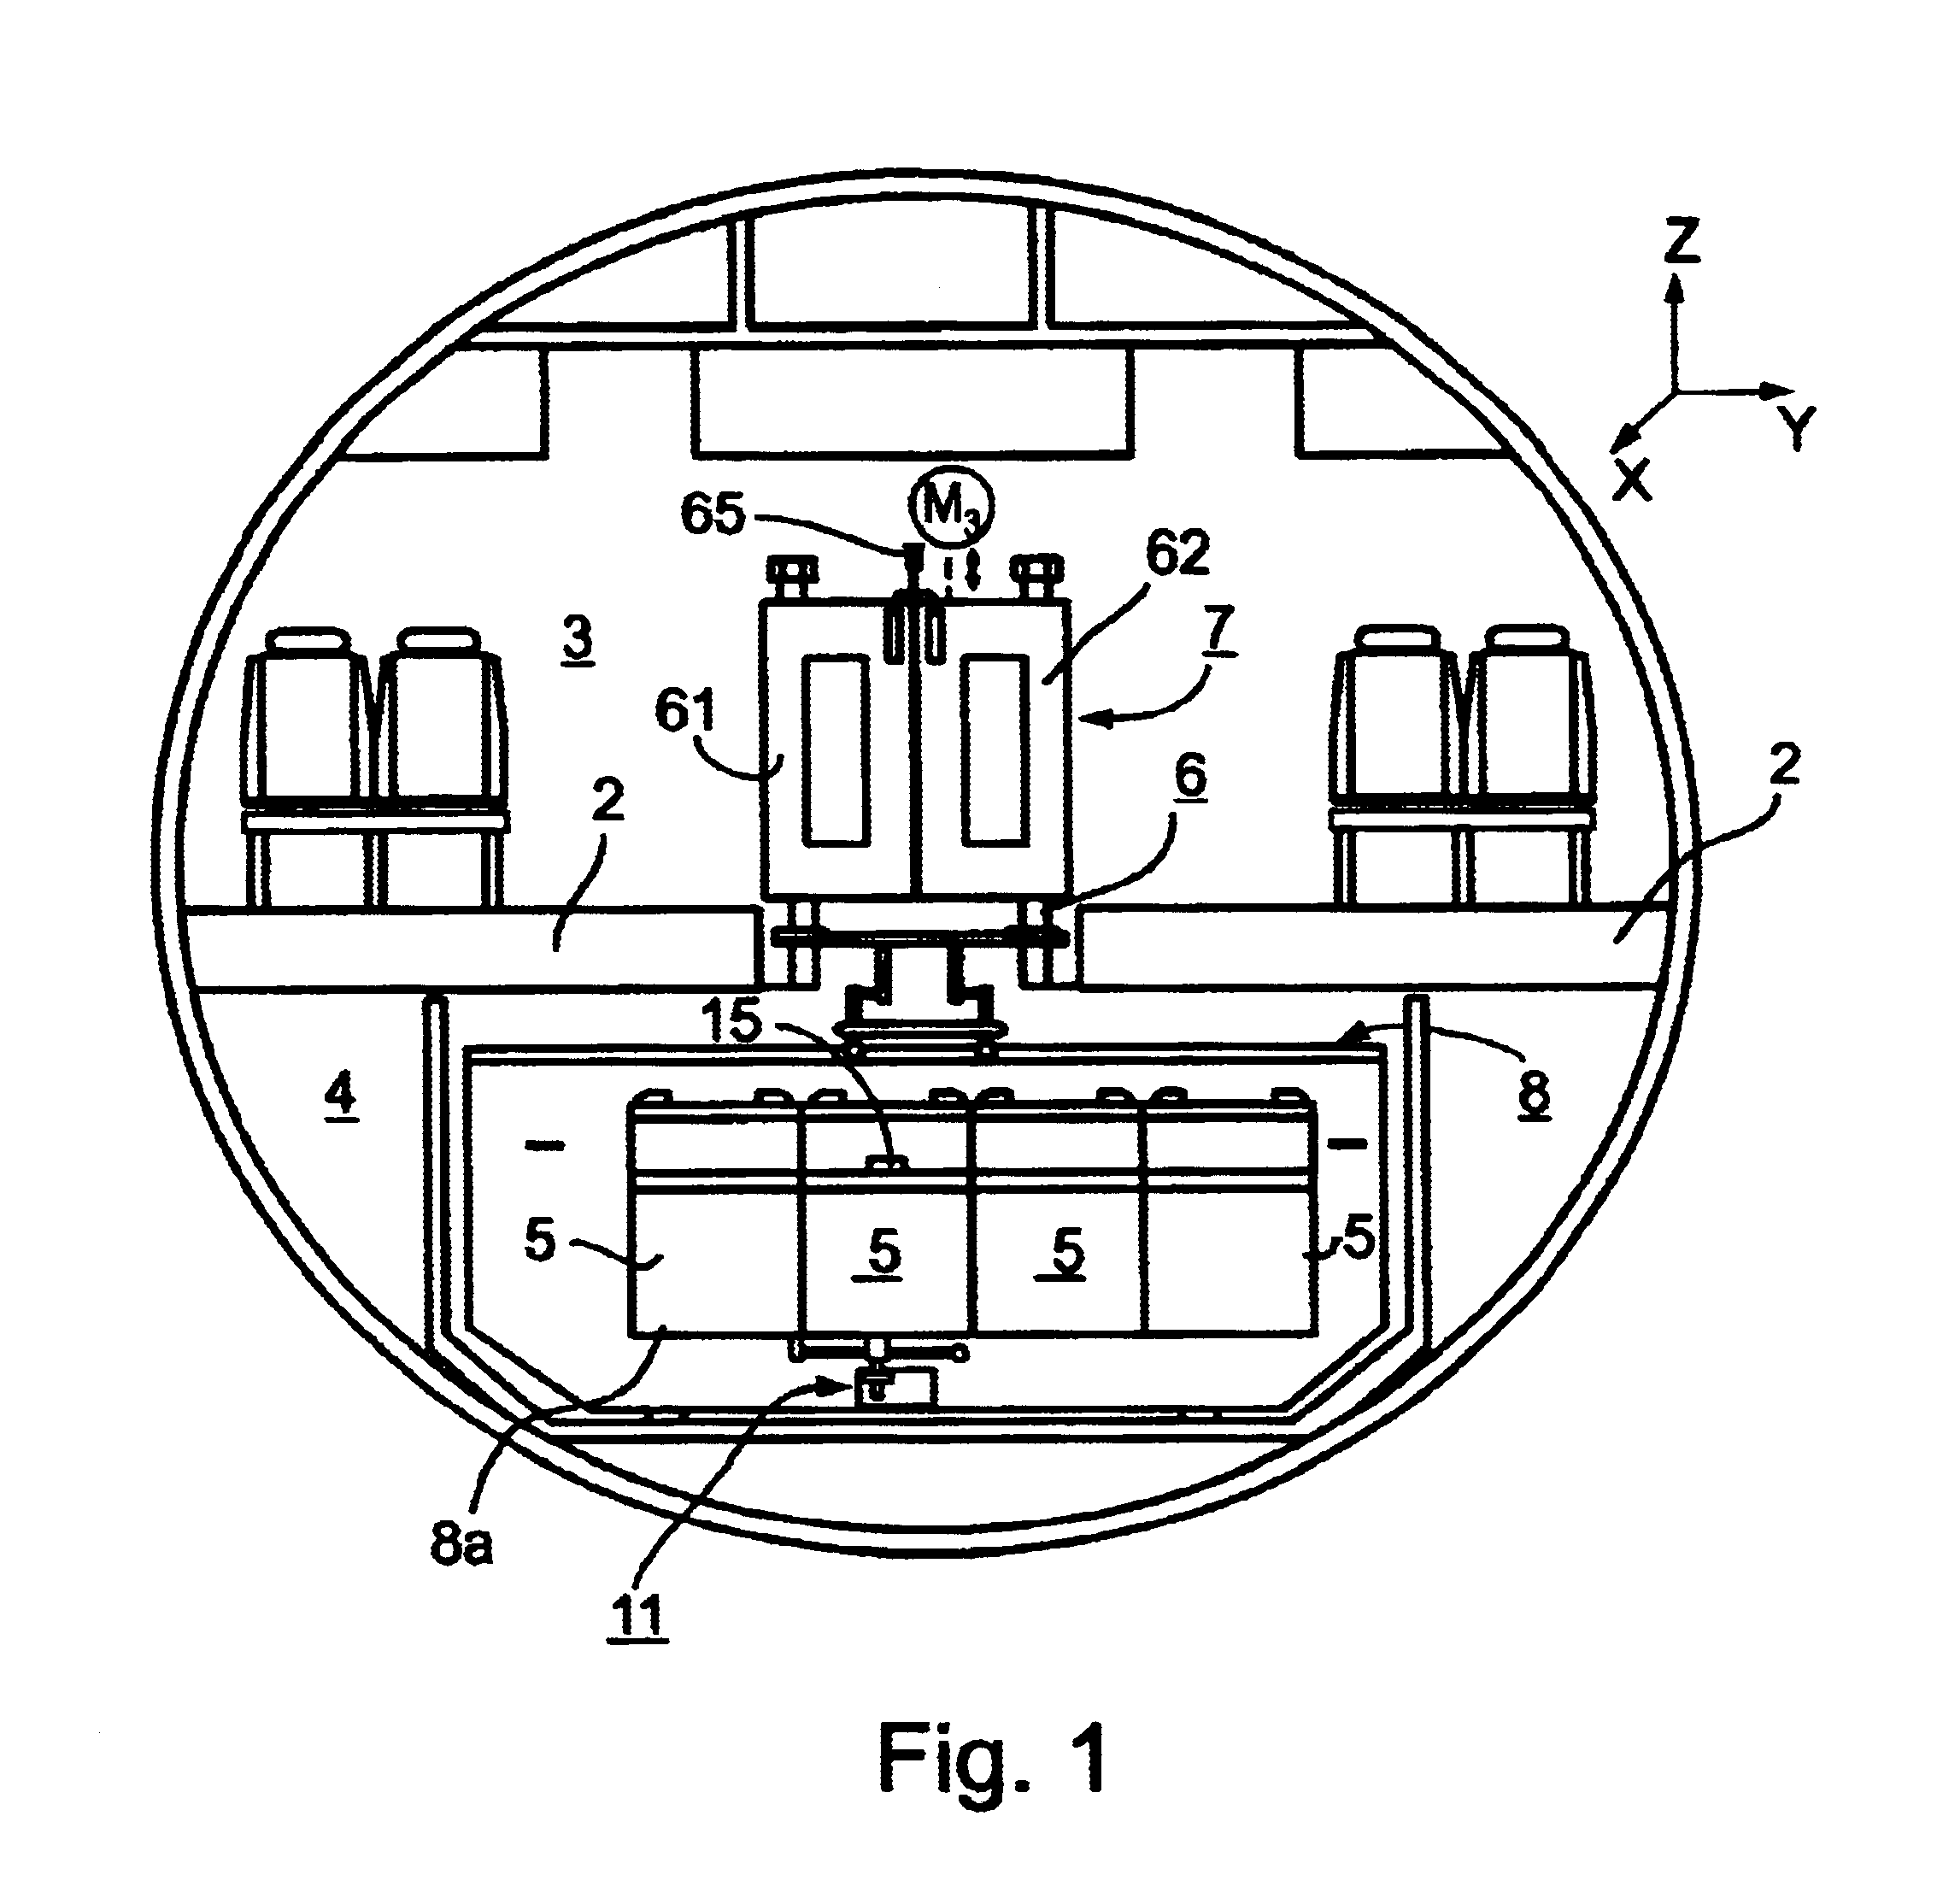 Container lifting apparatus particularly useful in aircraft for storing and retrieving galley articles in the cargo hold